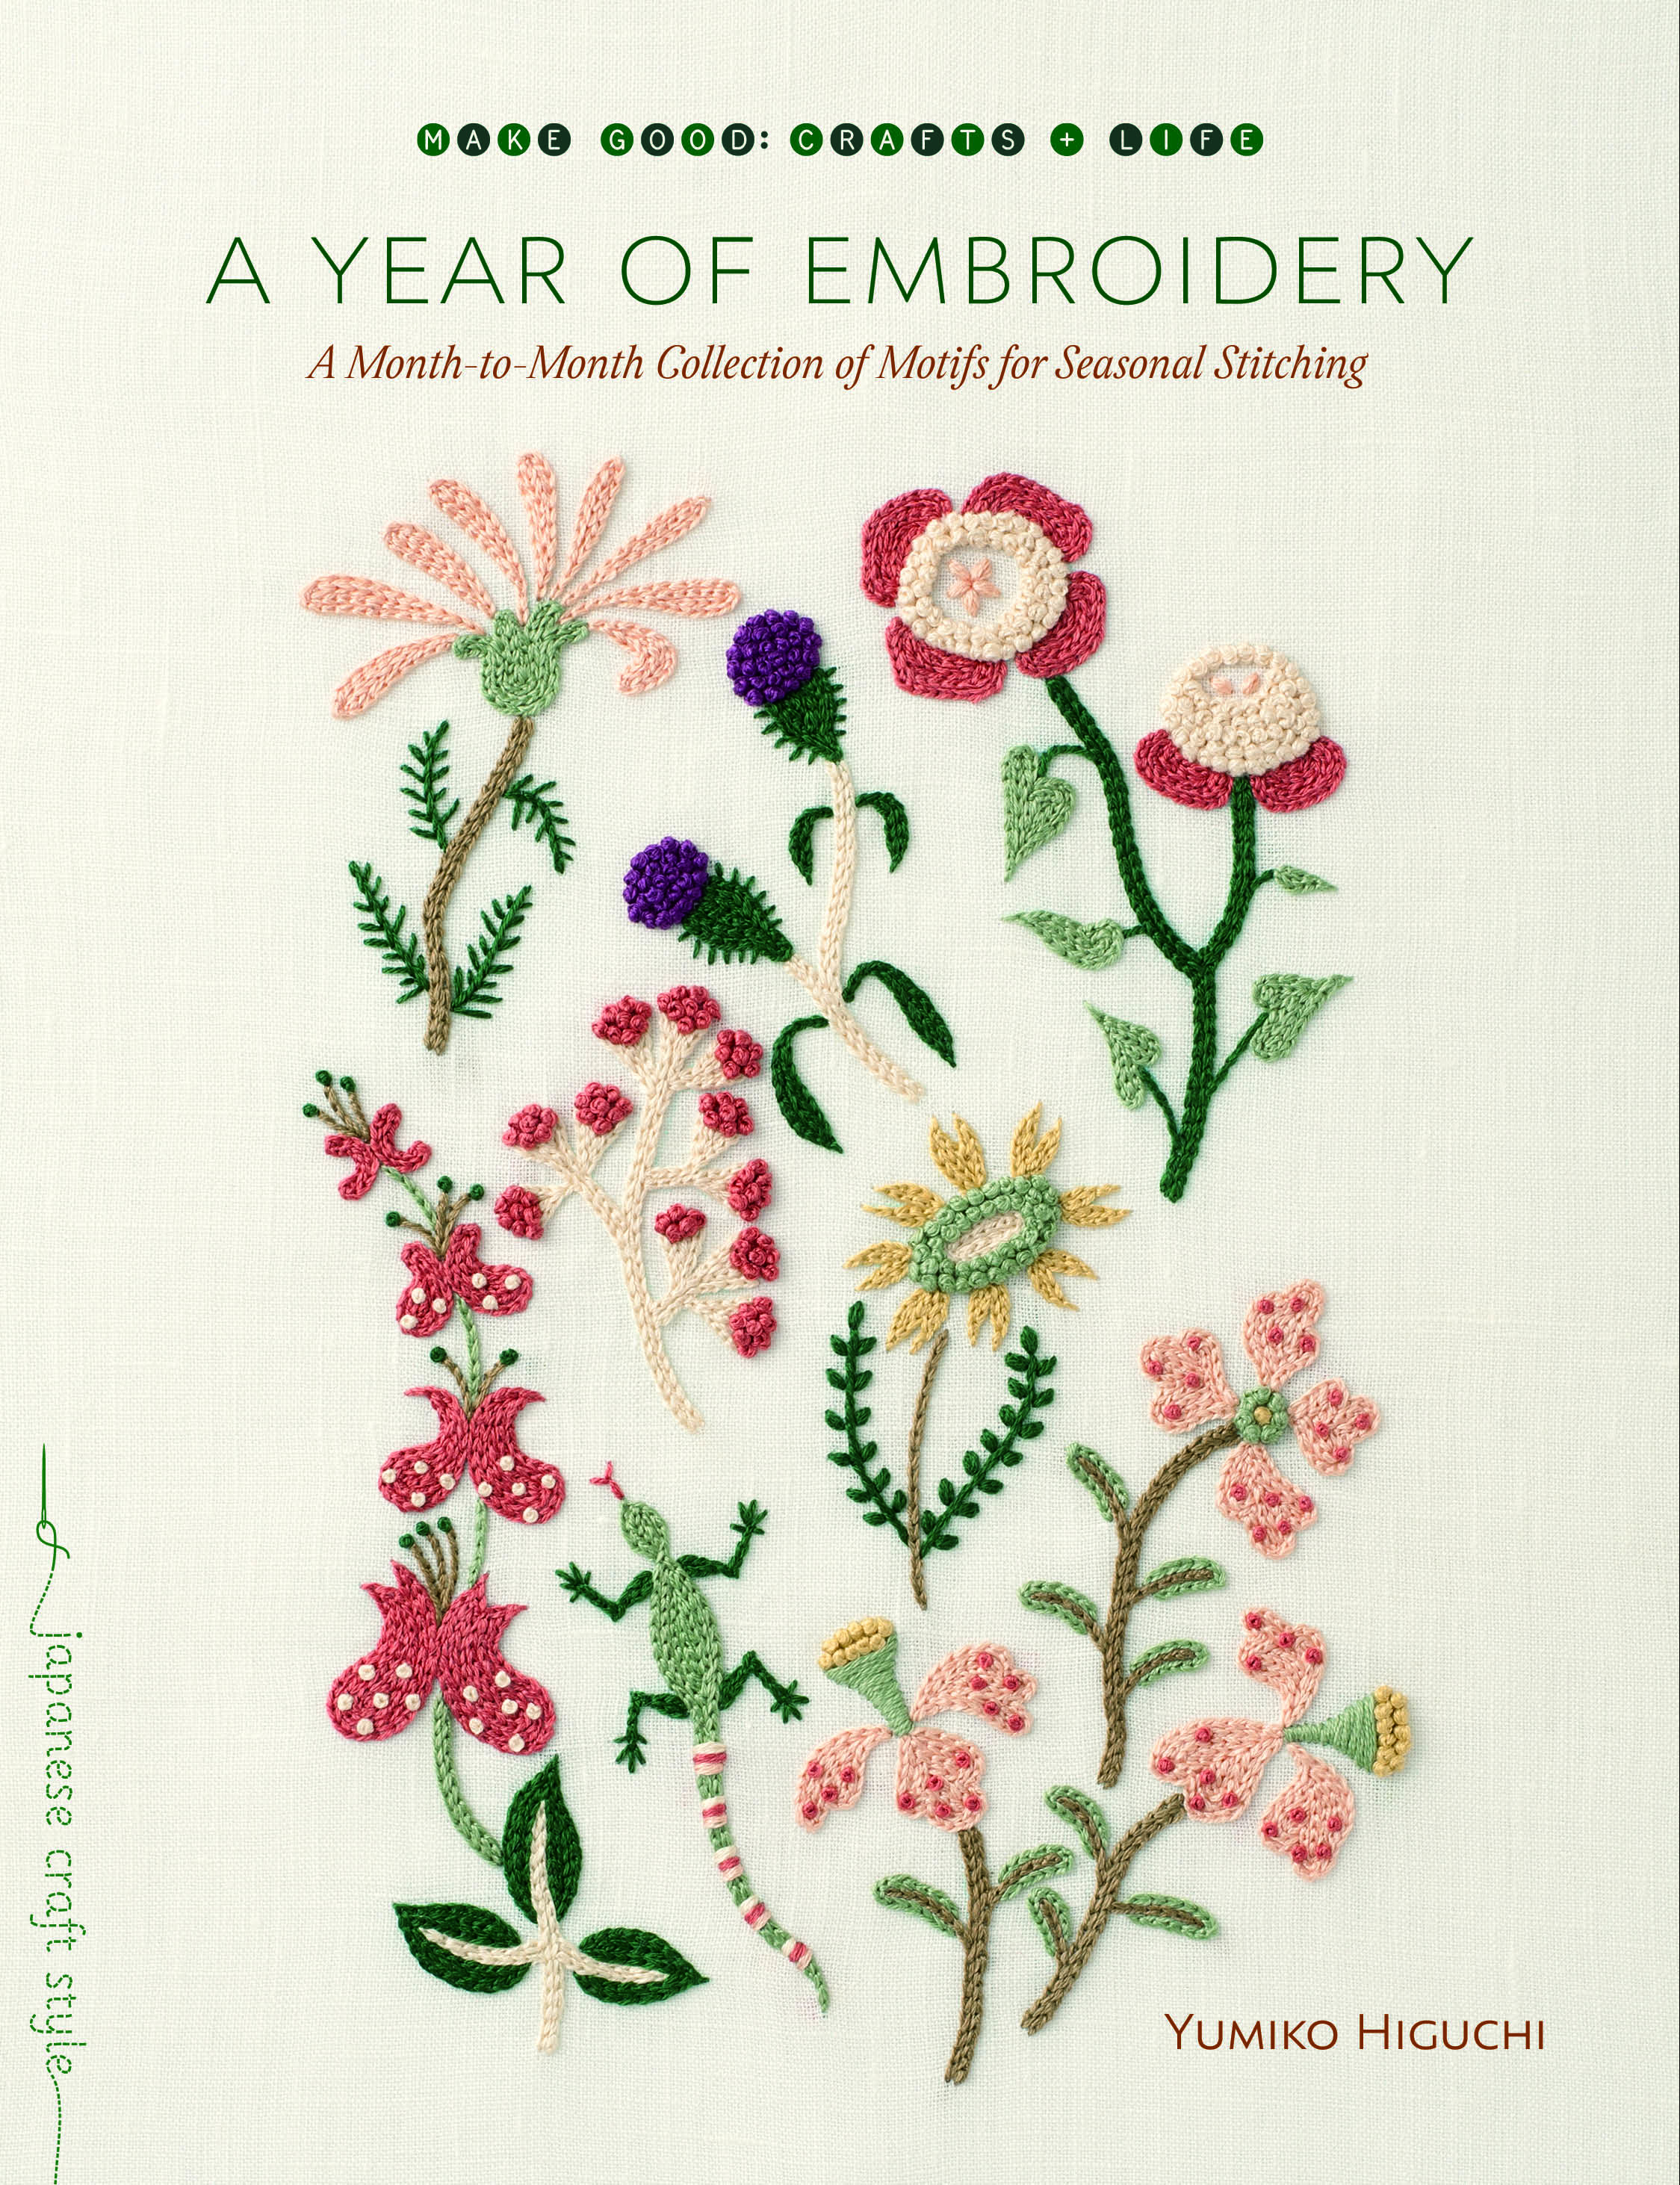 Beginner Embroidery Patterns Diy Floral Cactus Embroidery Projects From A Year Of Embroidery